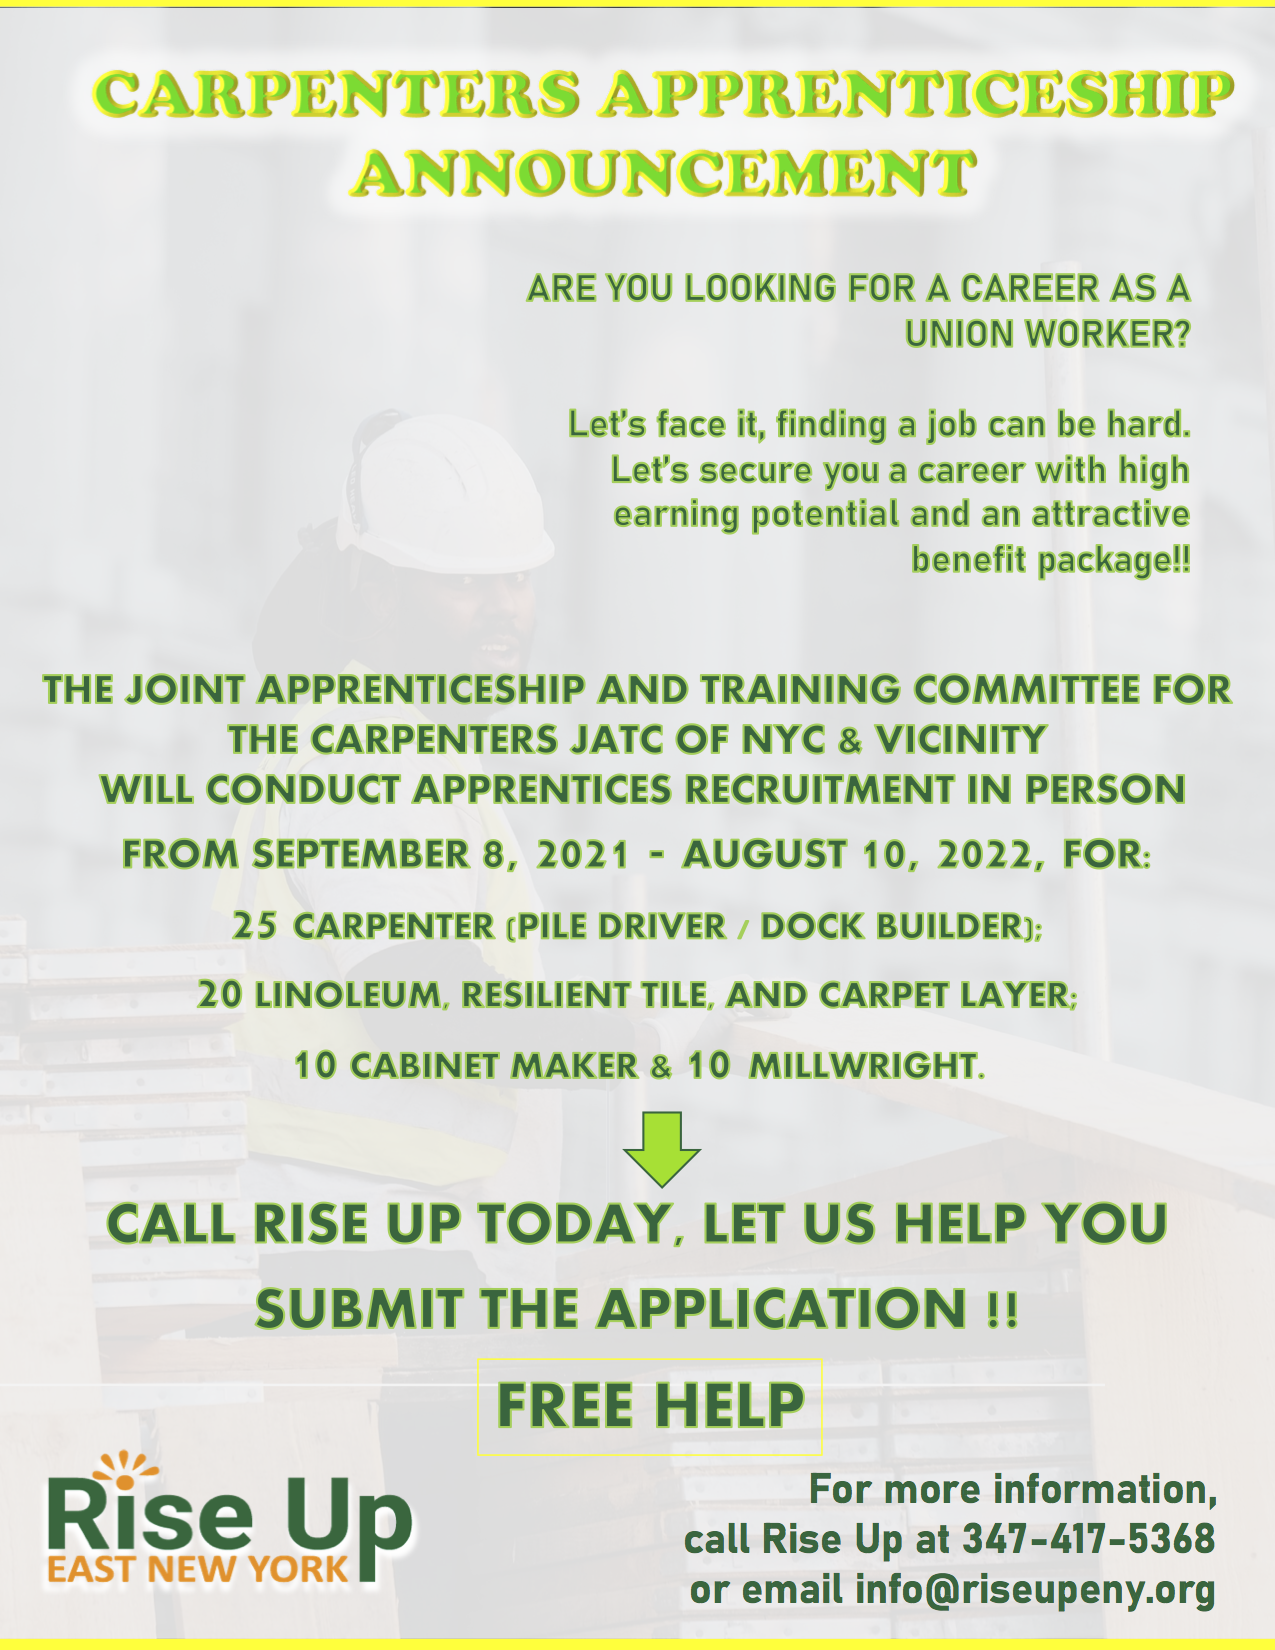 Are You Looking For A Job As A Carpenter?